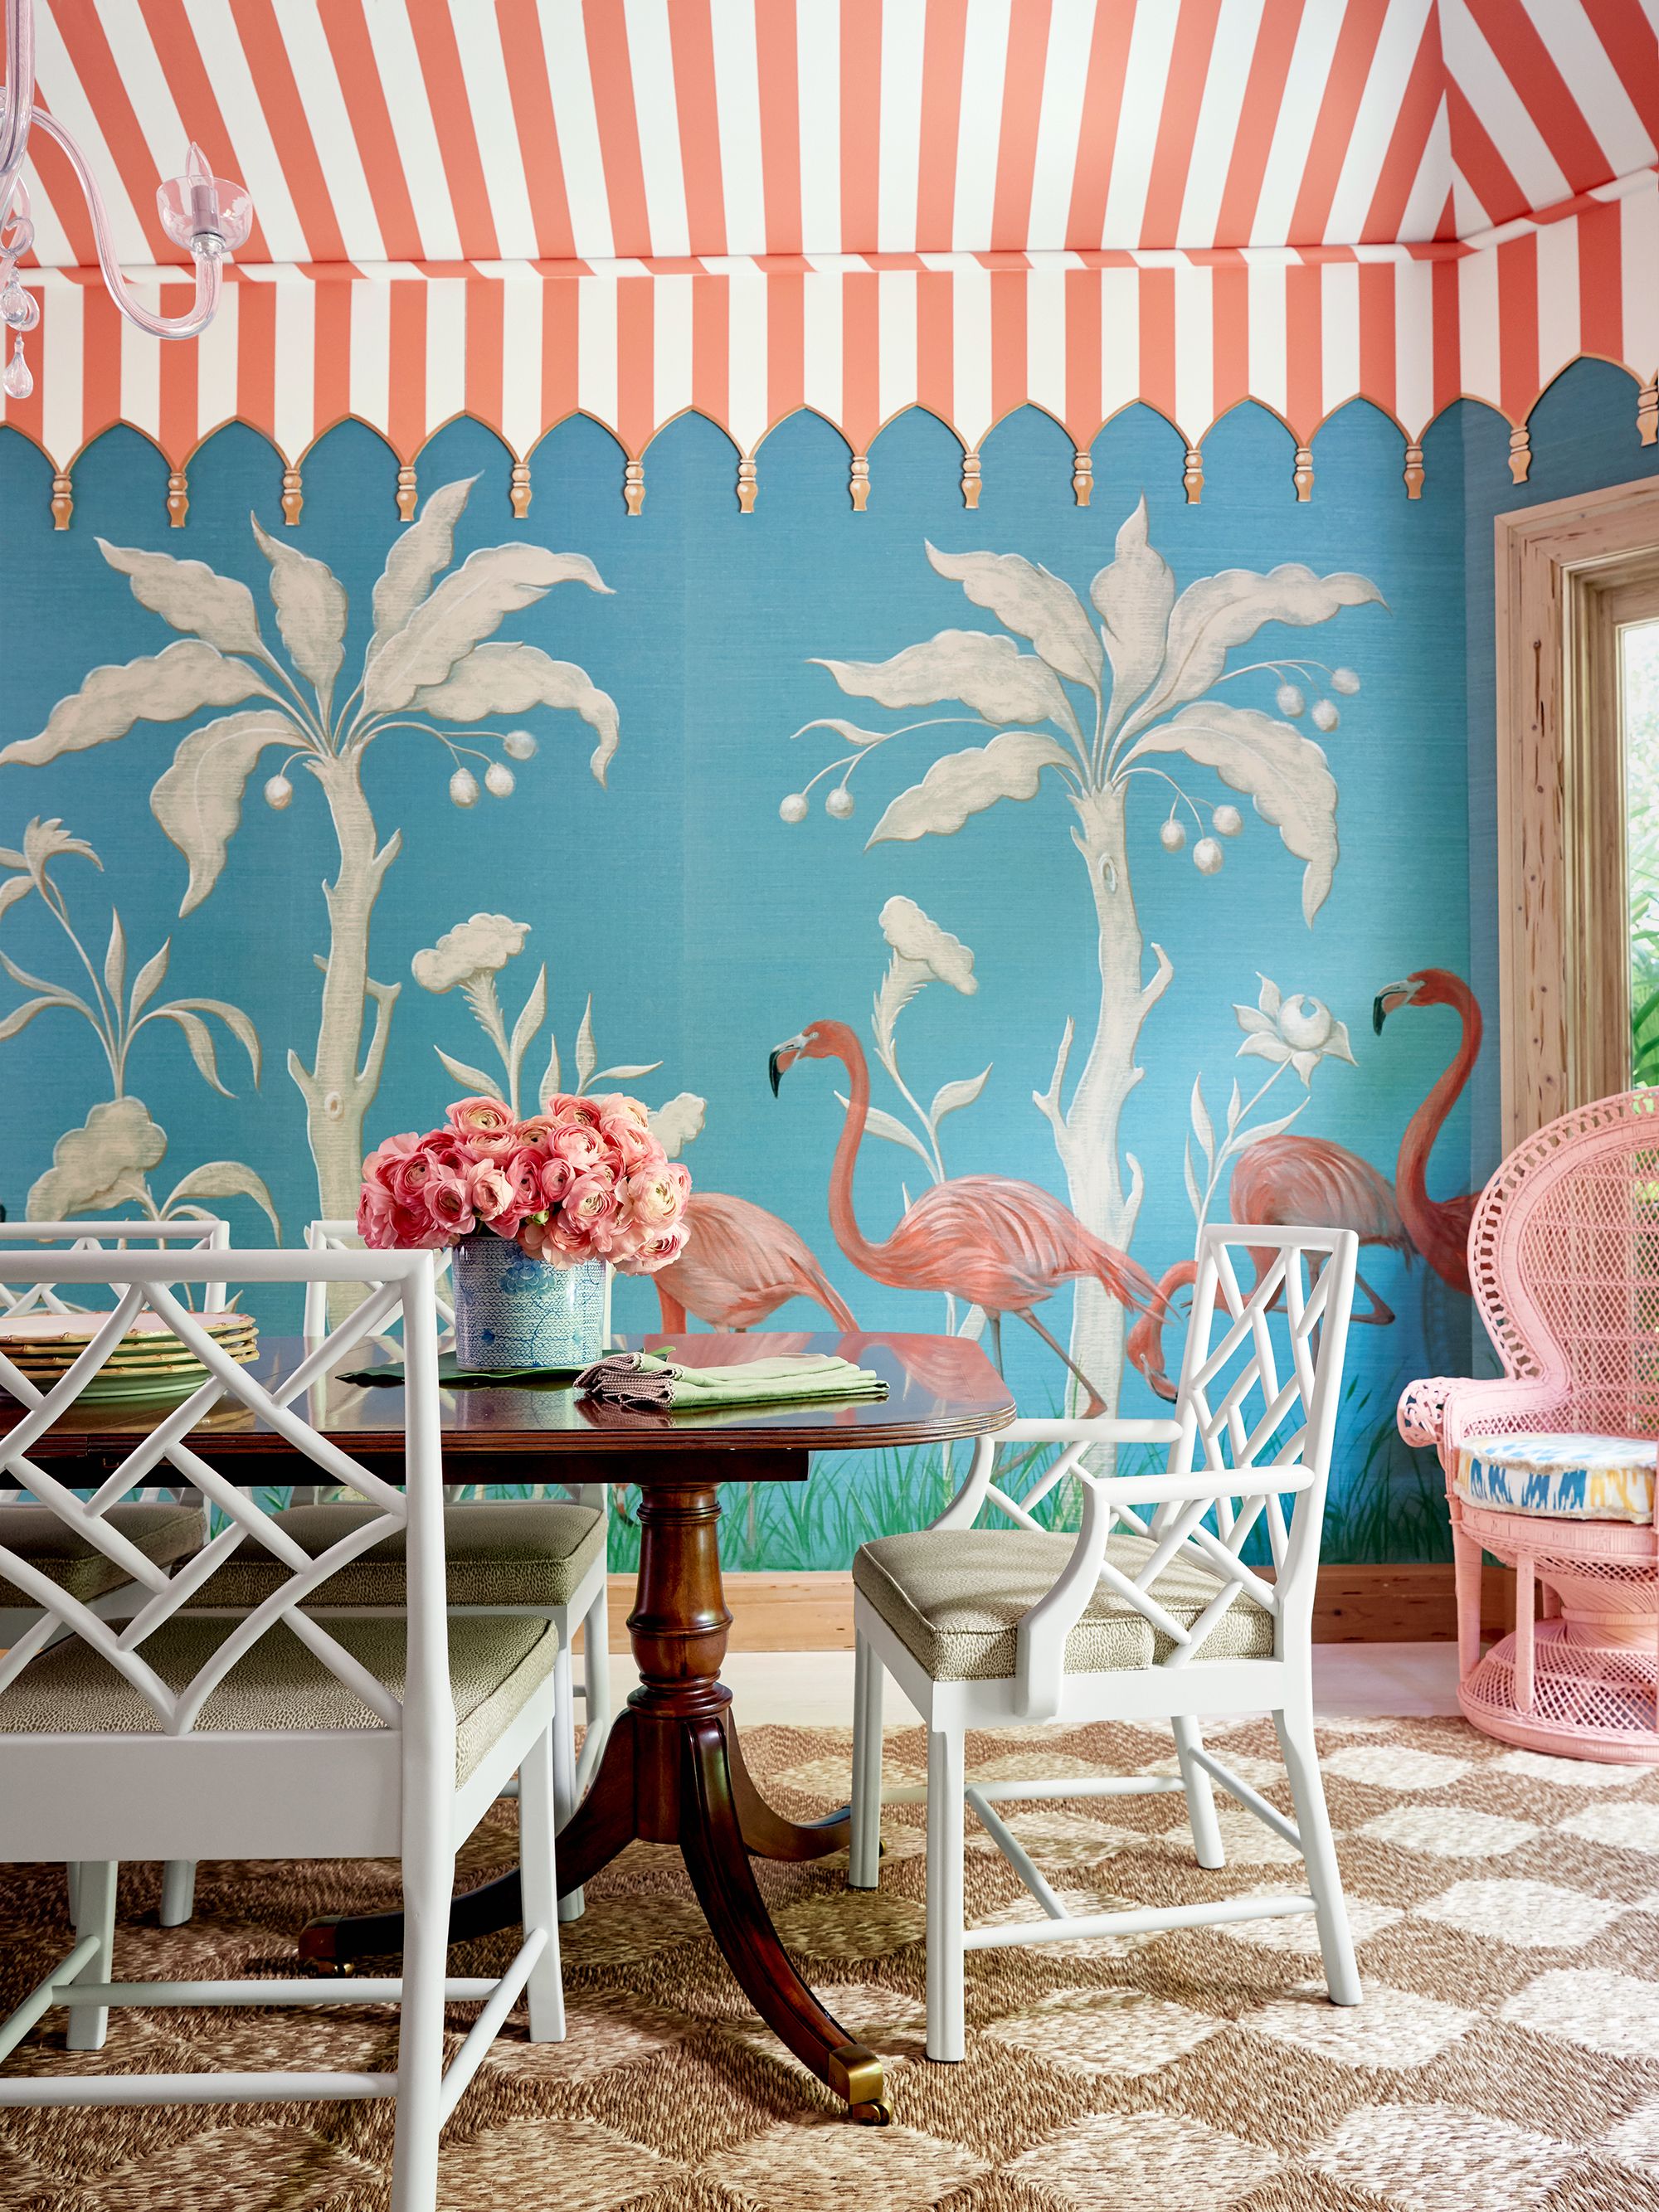 8 Spaces to Make You Fall in Love with Grasscloth Wallpaper